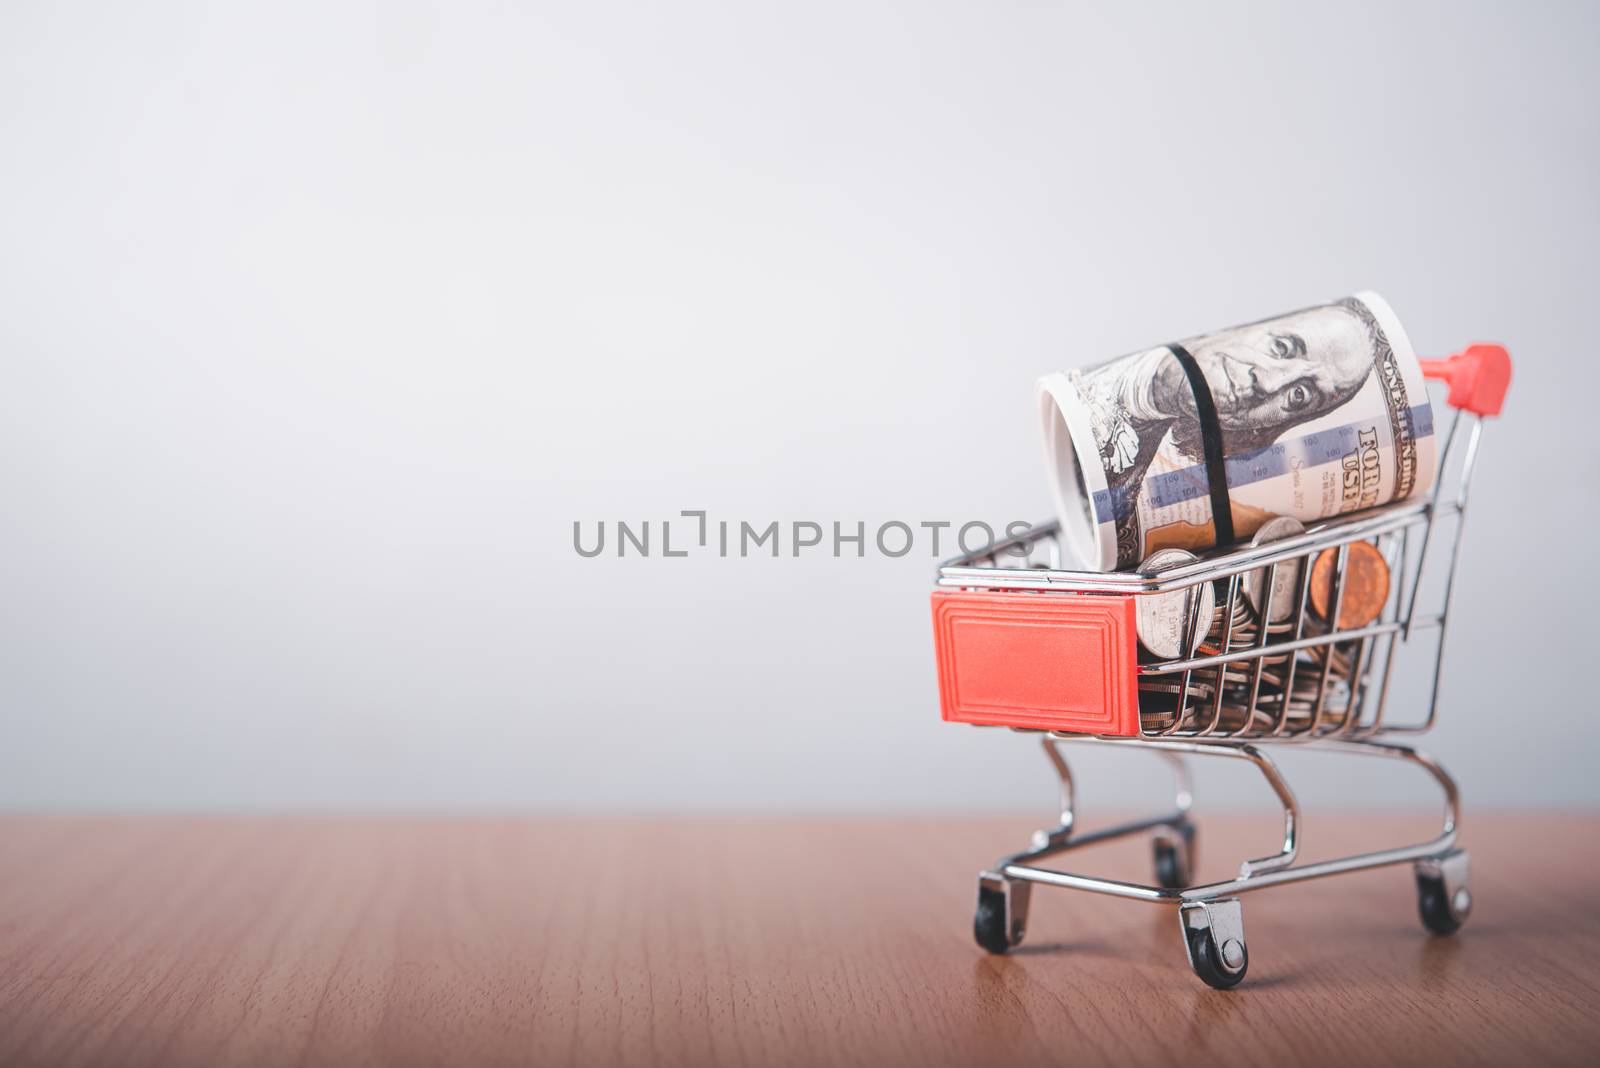  The currency coin is in a shopping cart that is placed on a wooden floor.